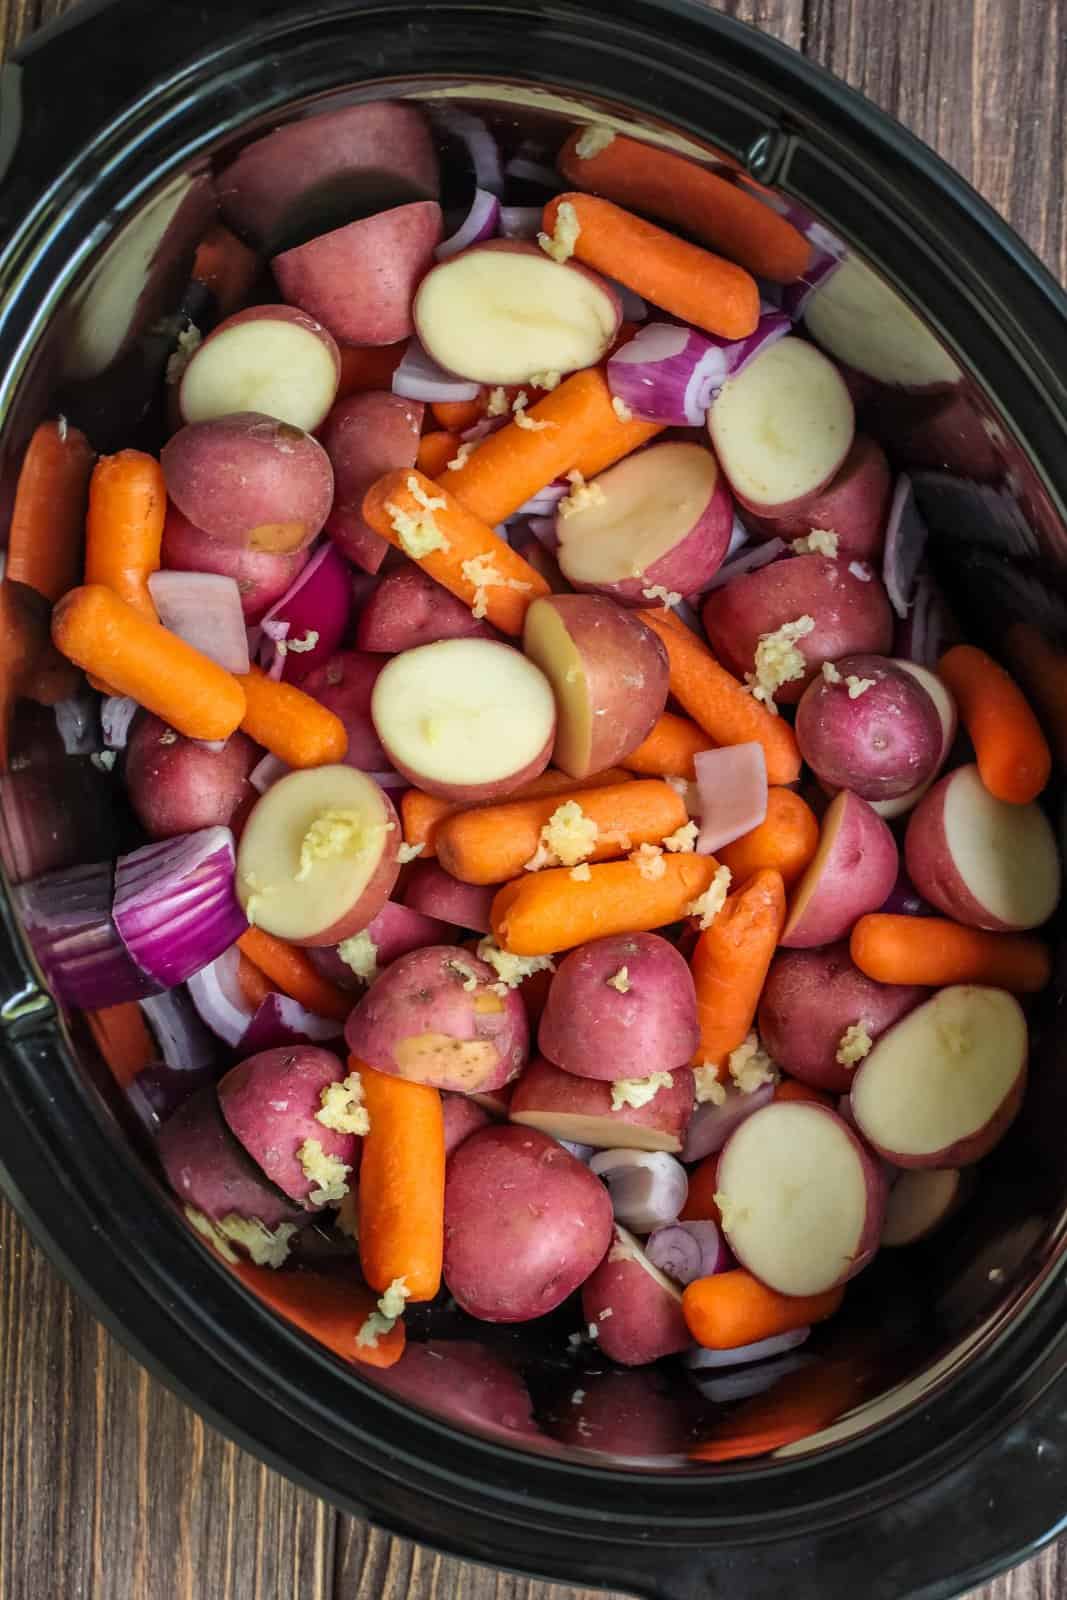 Vegetables added to slow cooker.